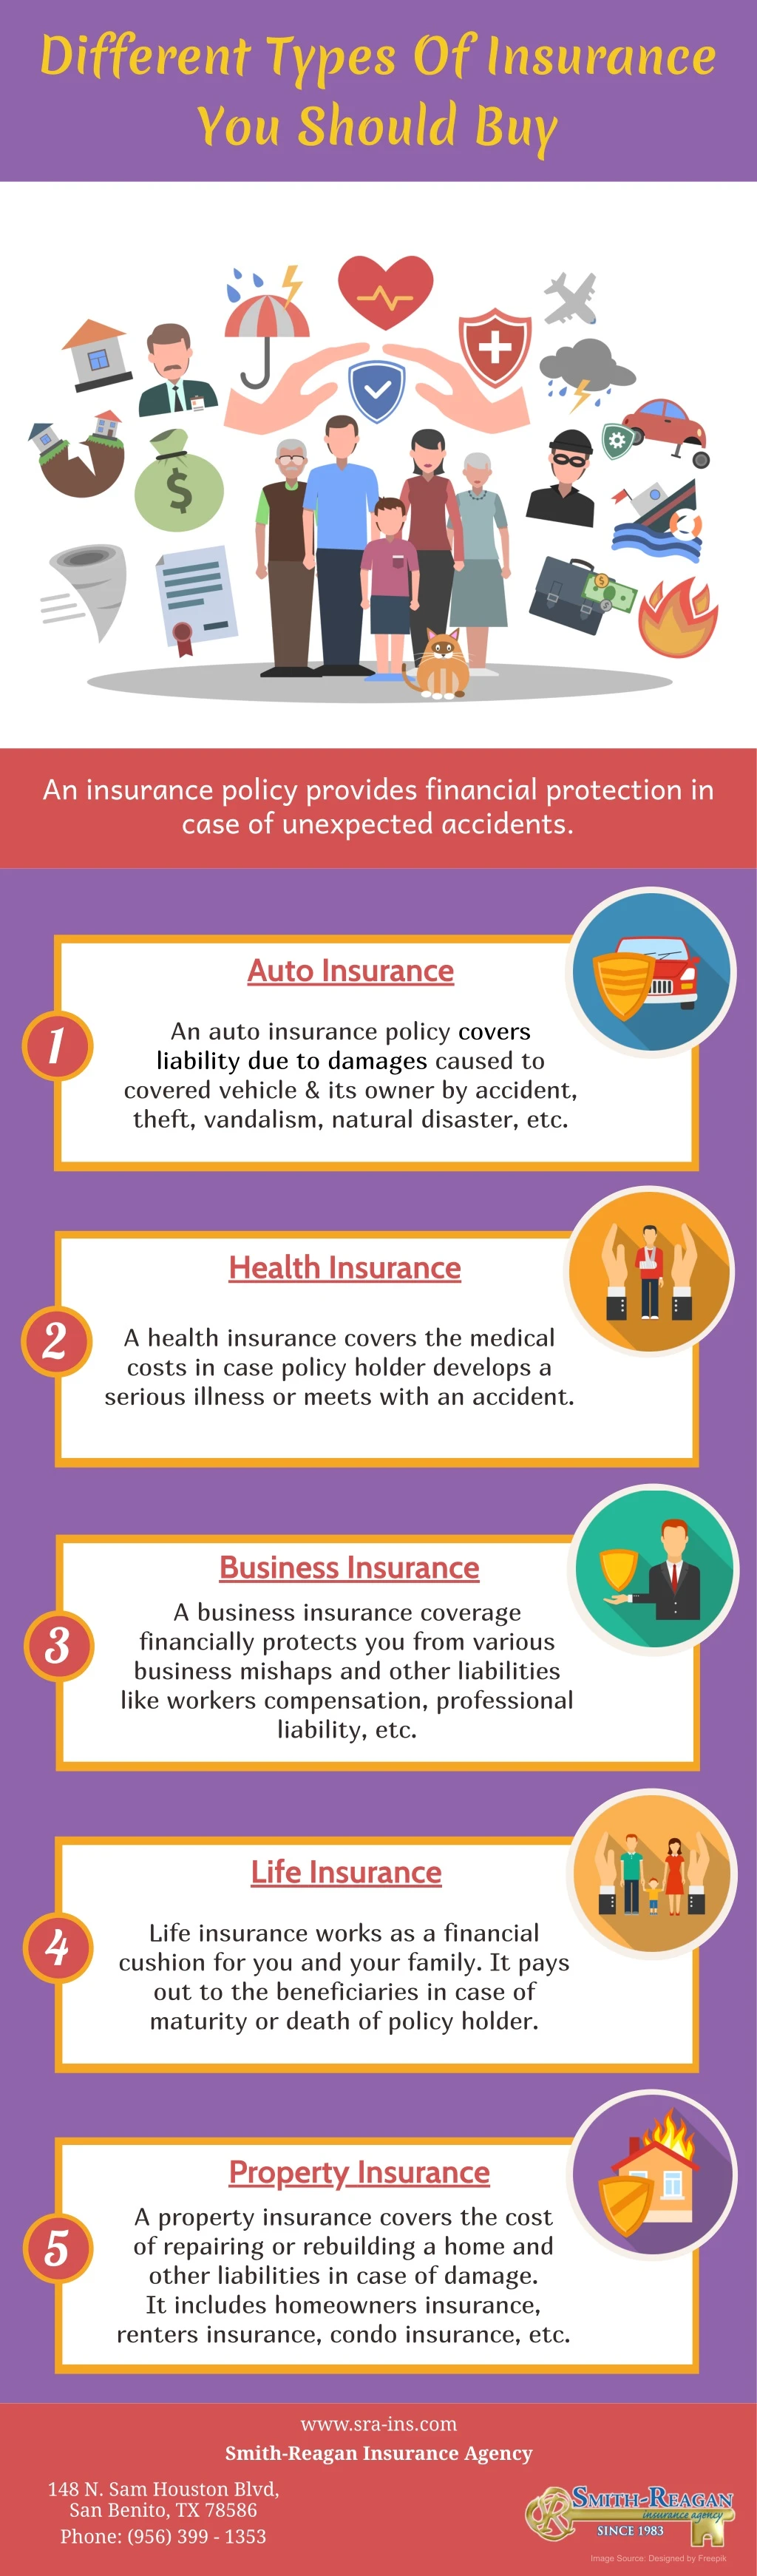 different types of insurance you should buy